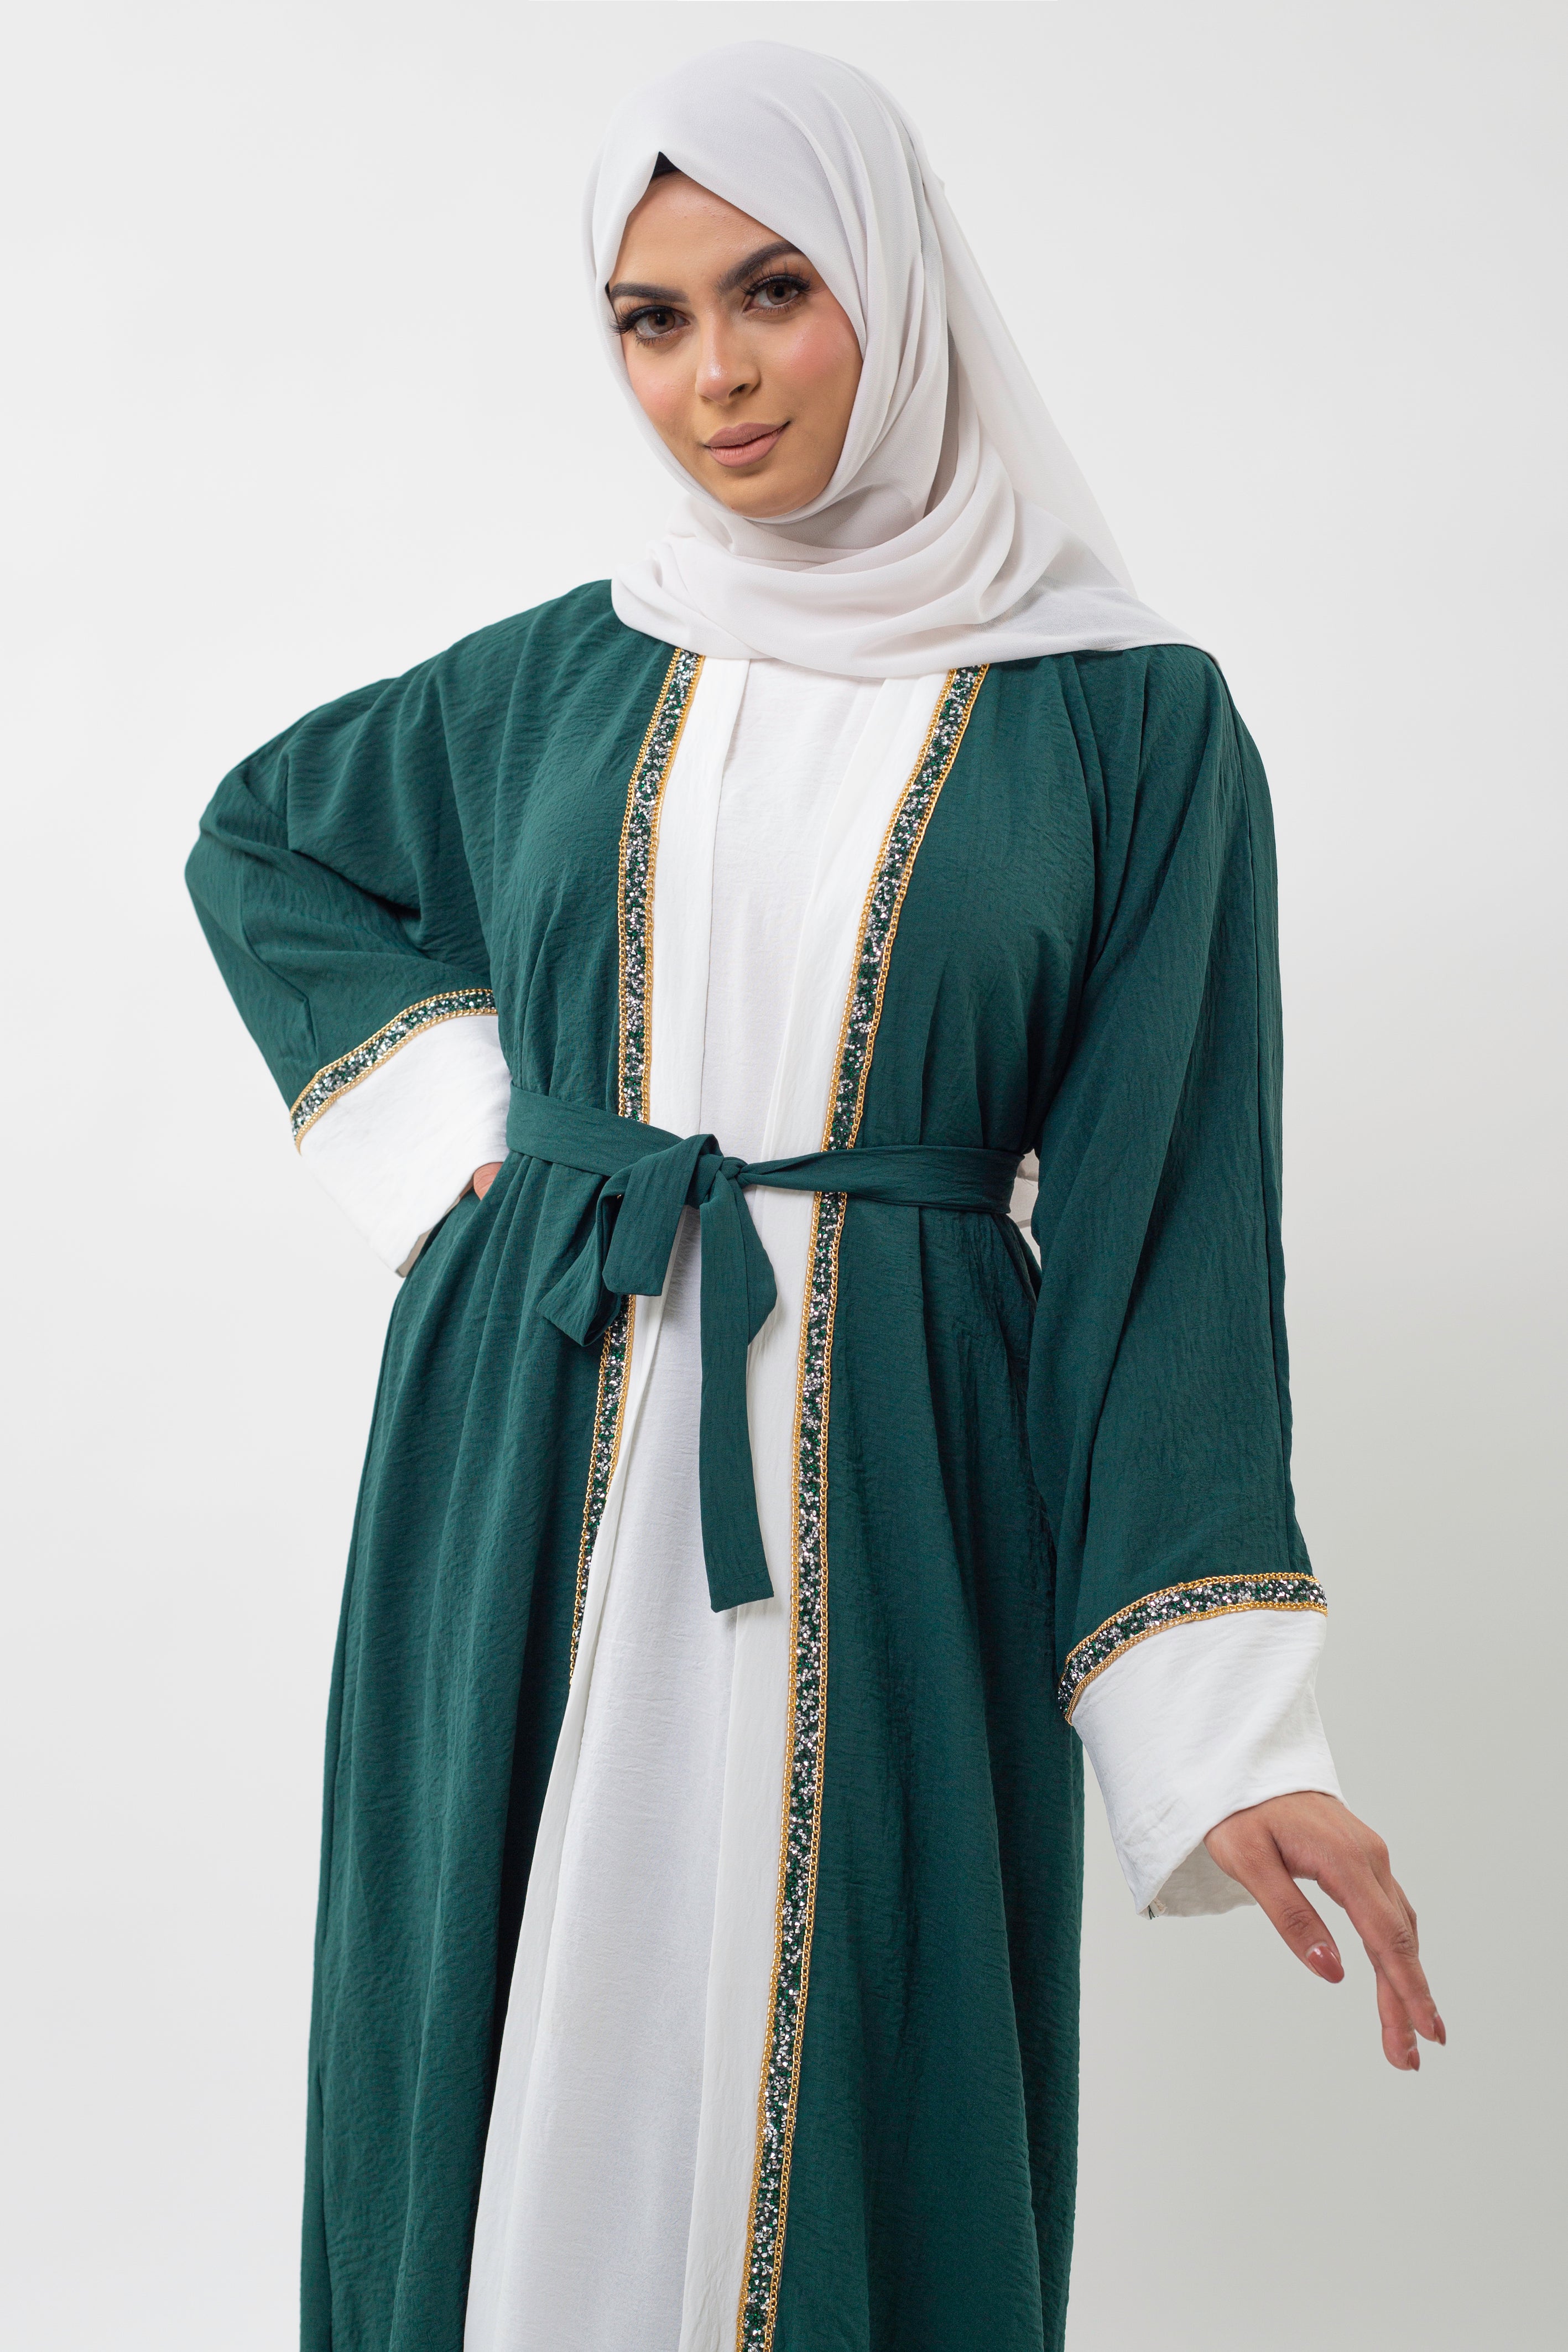 Embracing the Abaya in Summer: Modesty and Style in Hot Weather